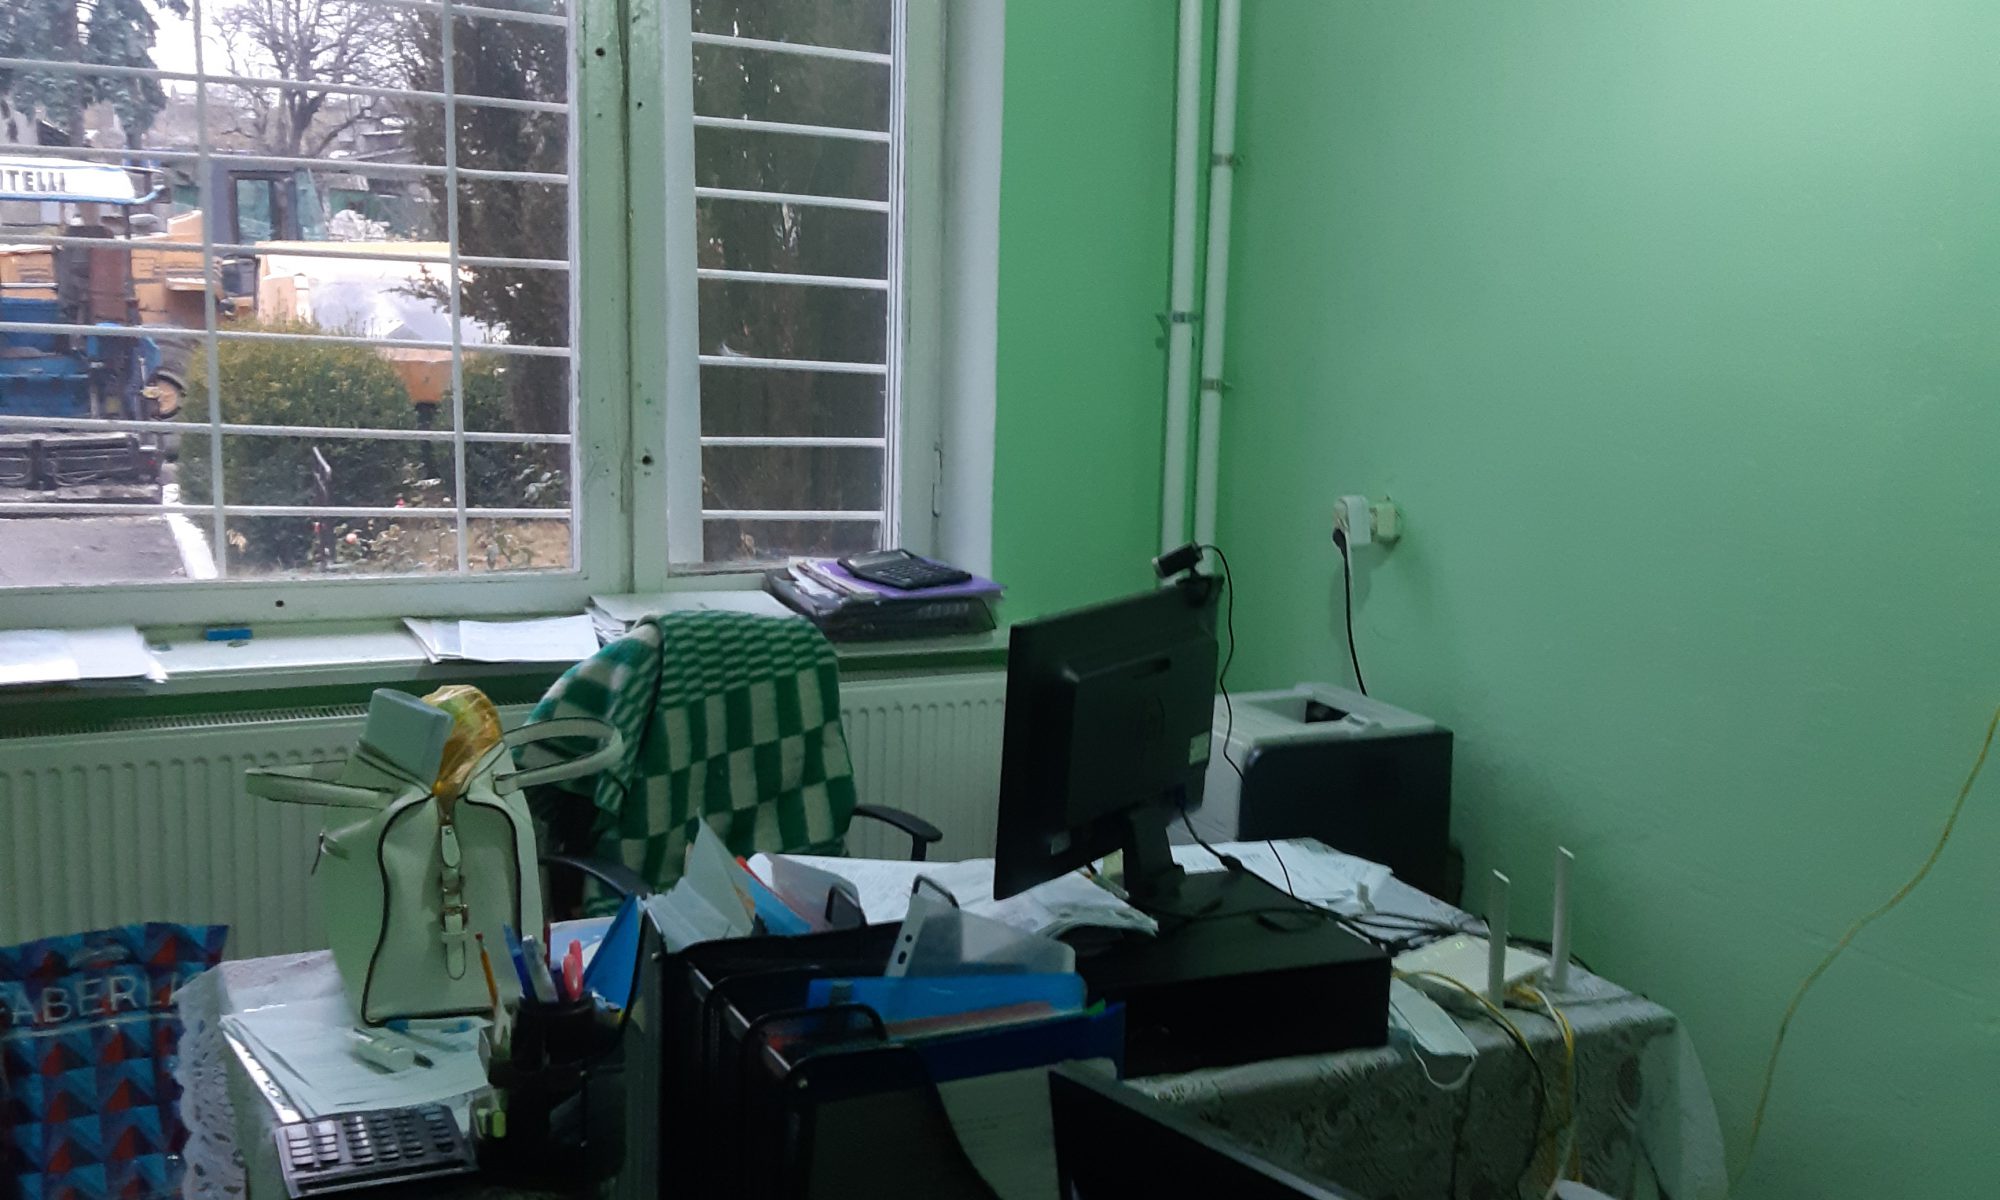 Social workers' office in a Moldovan village.